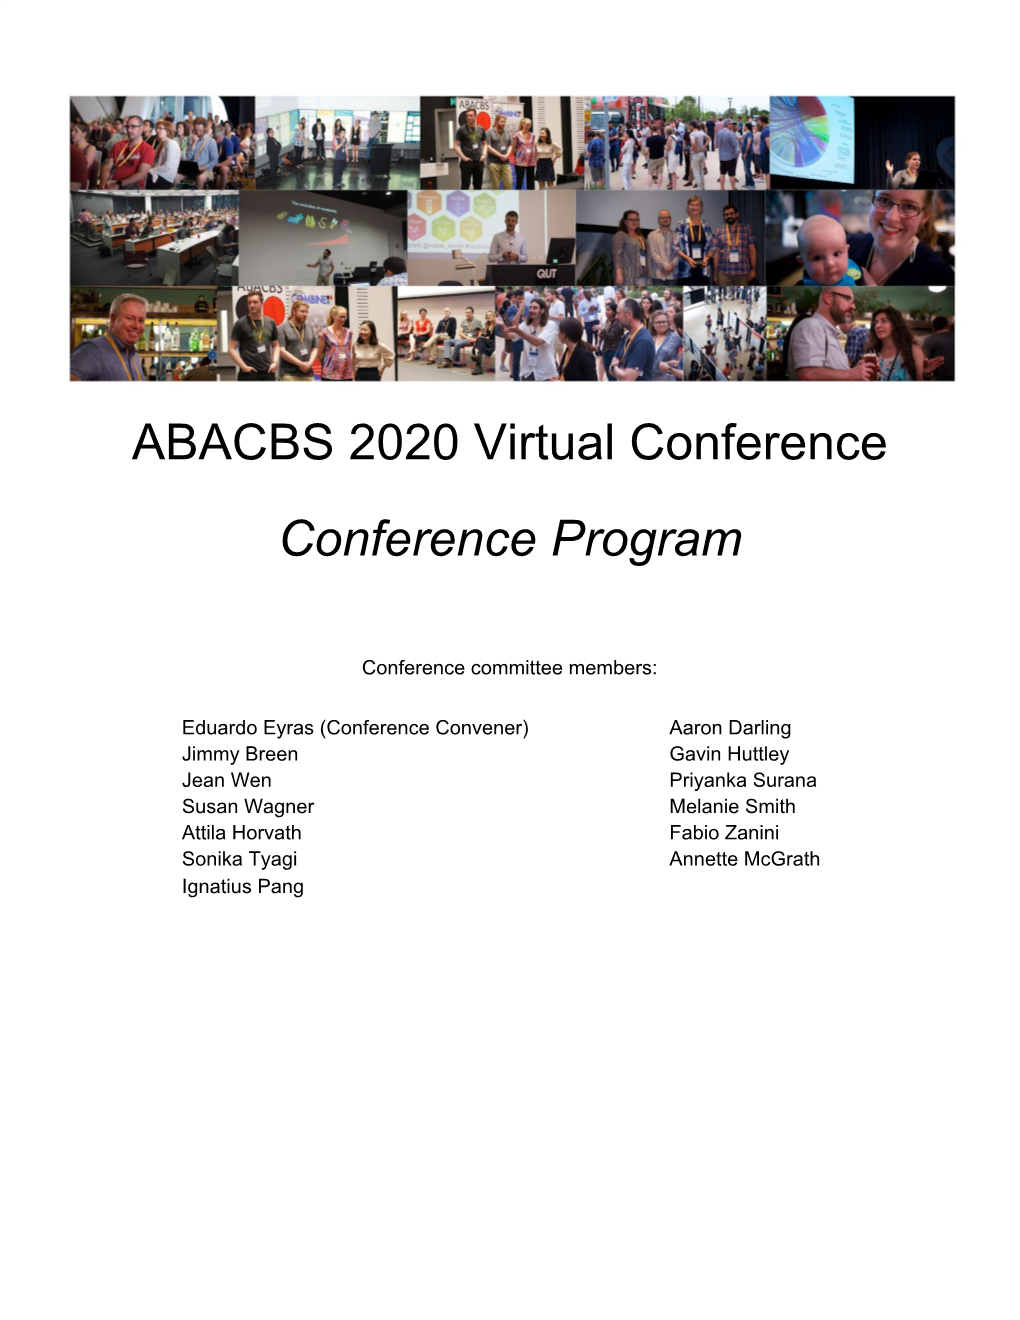 ABACBS 2020 Virtual Conference Conference Program